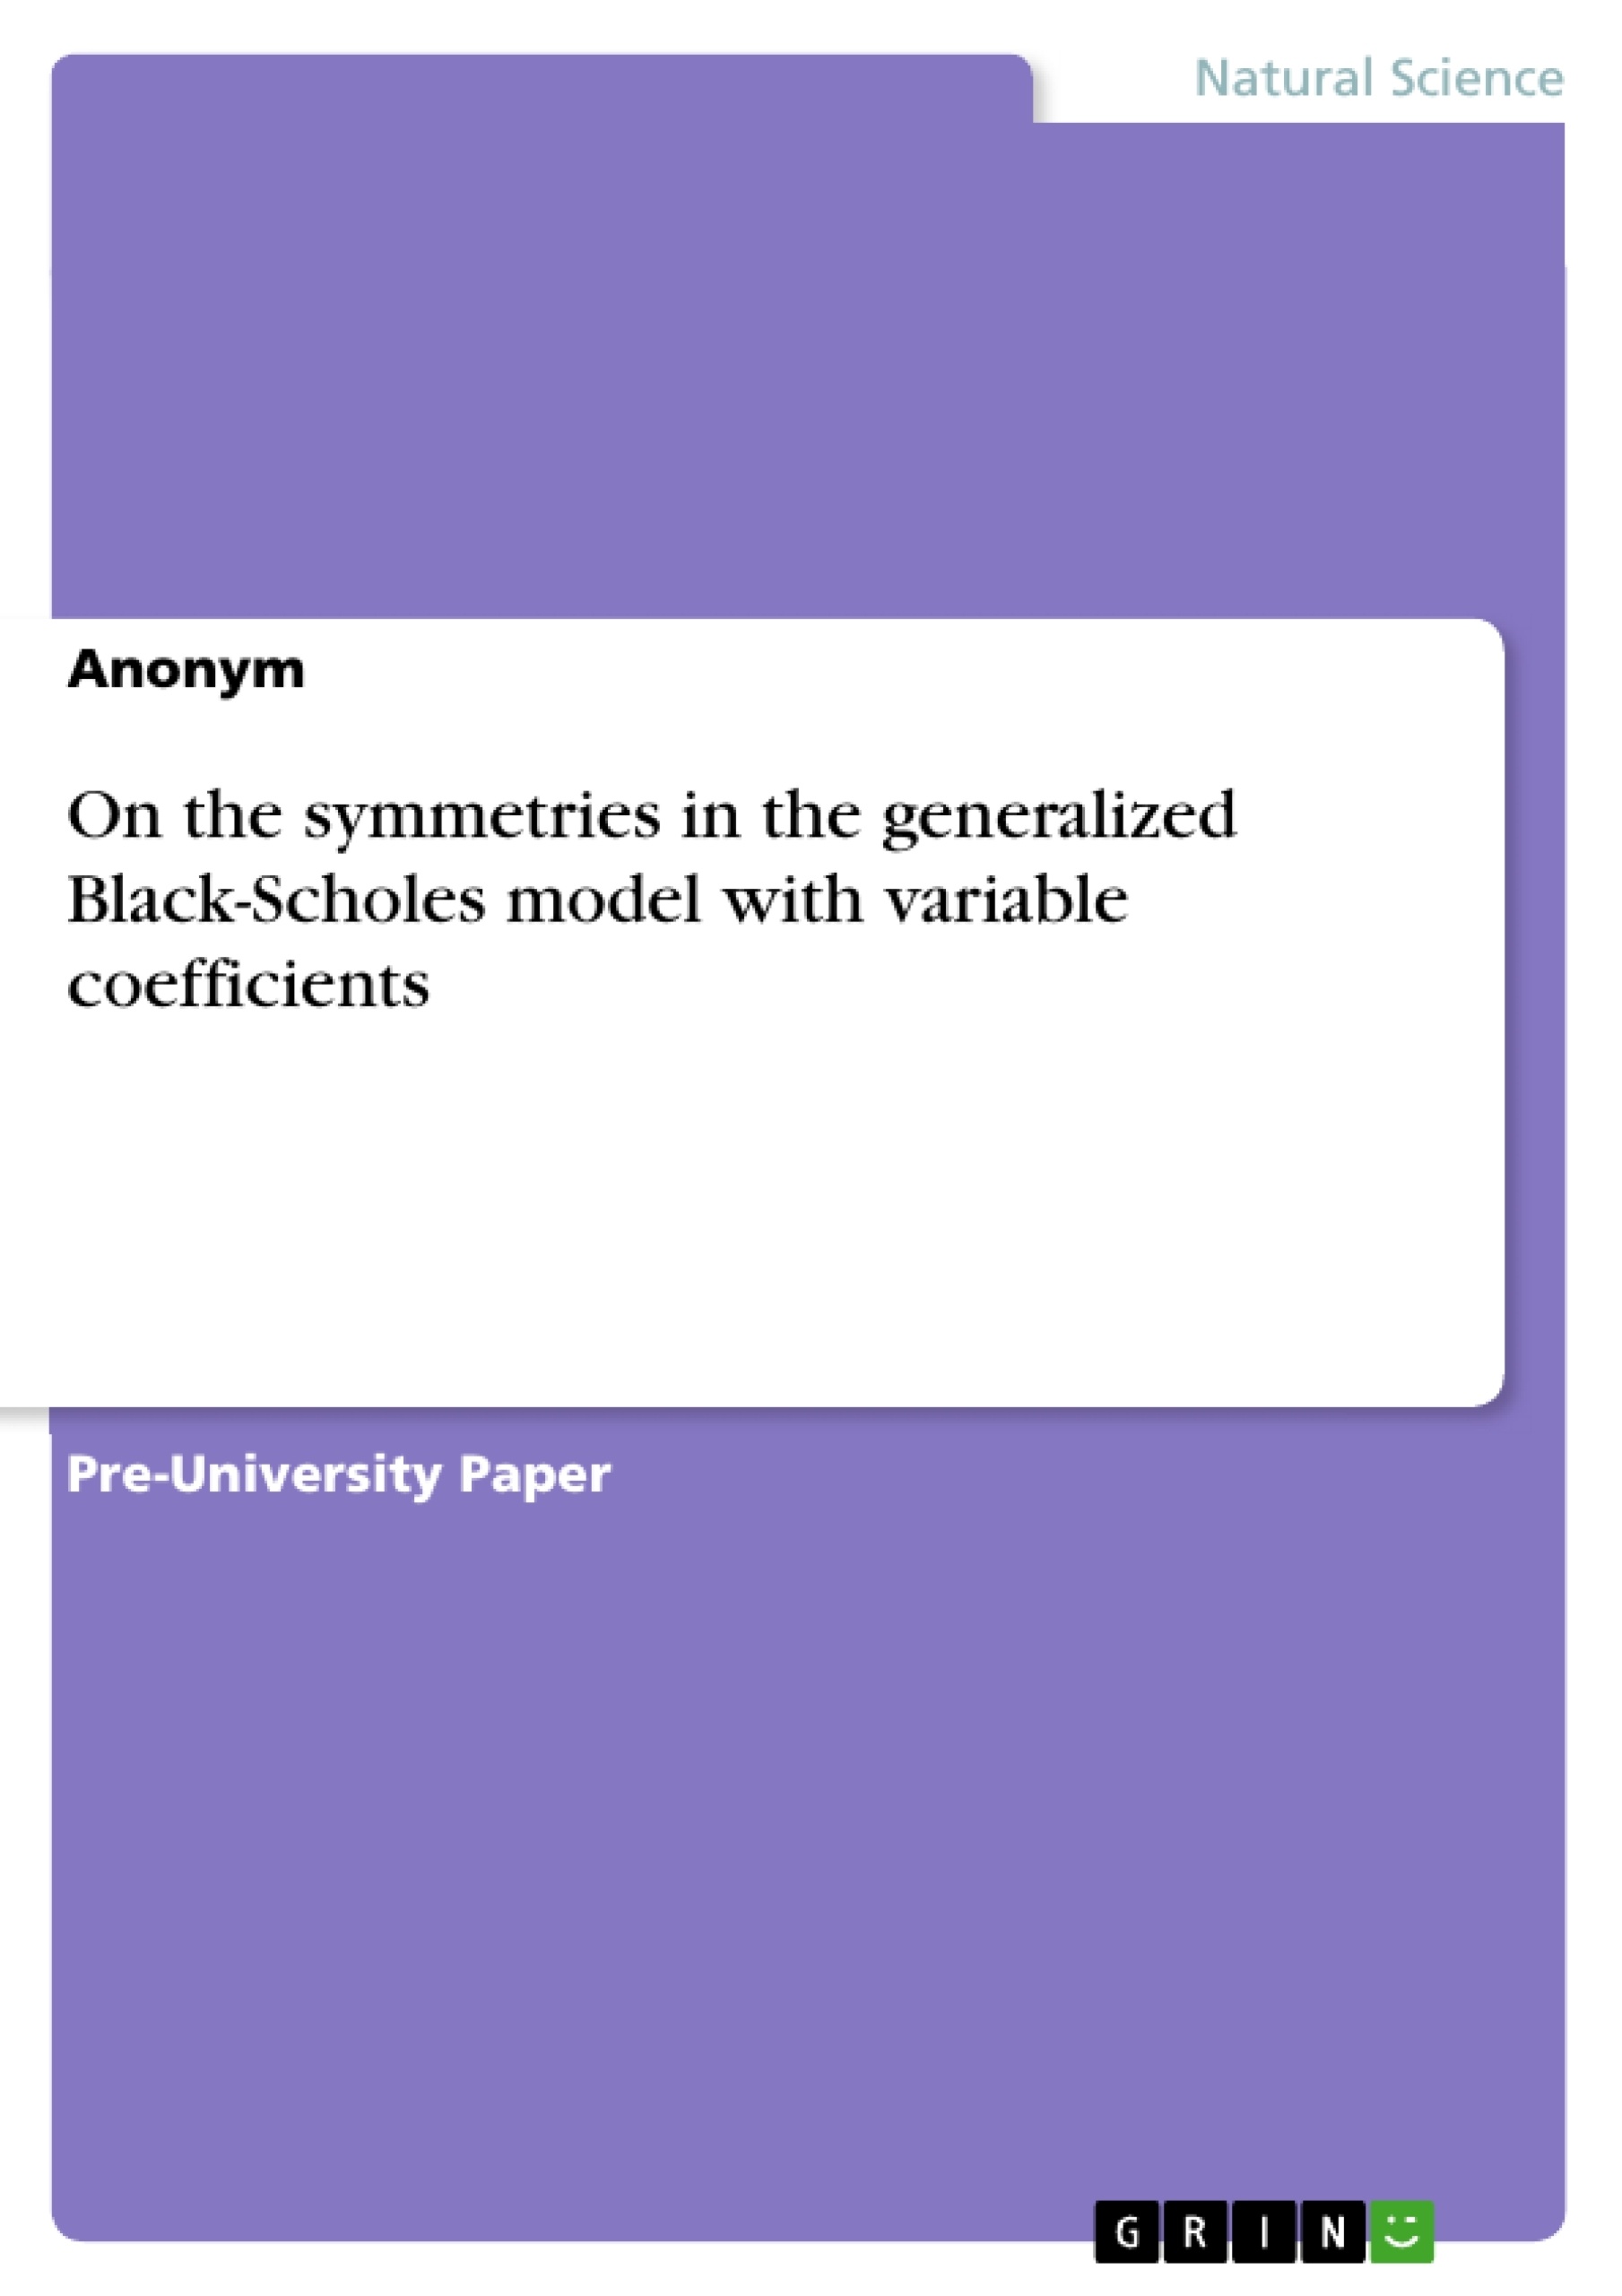 Titre: On the symmetries in the generalized Black-Scholes model with variable coefficients